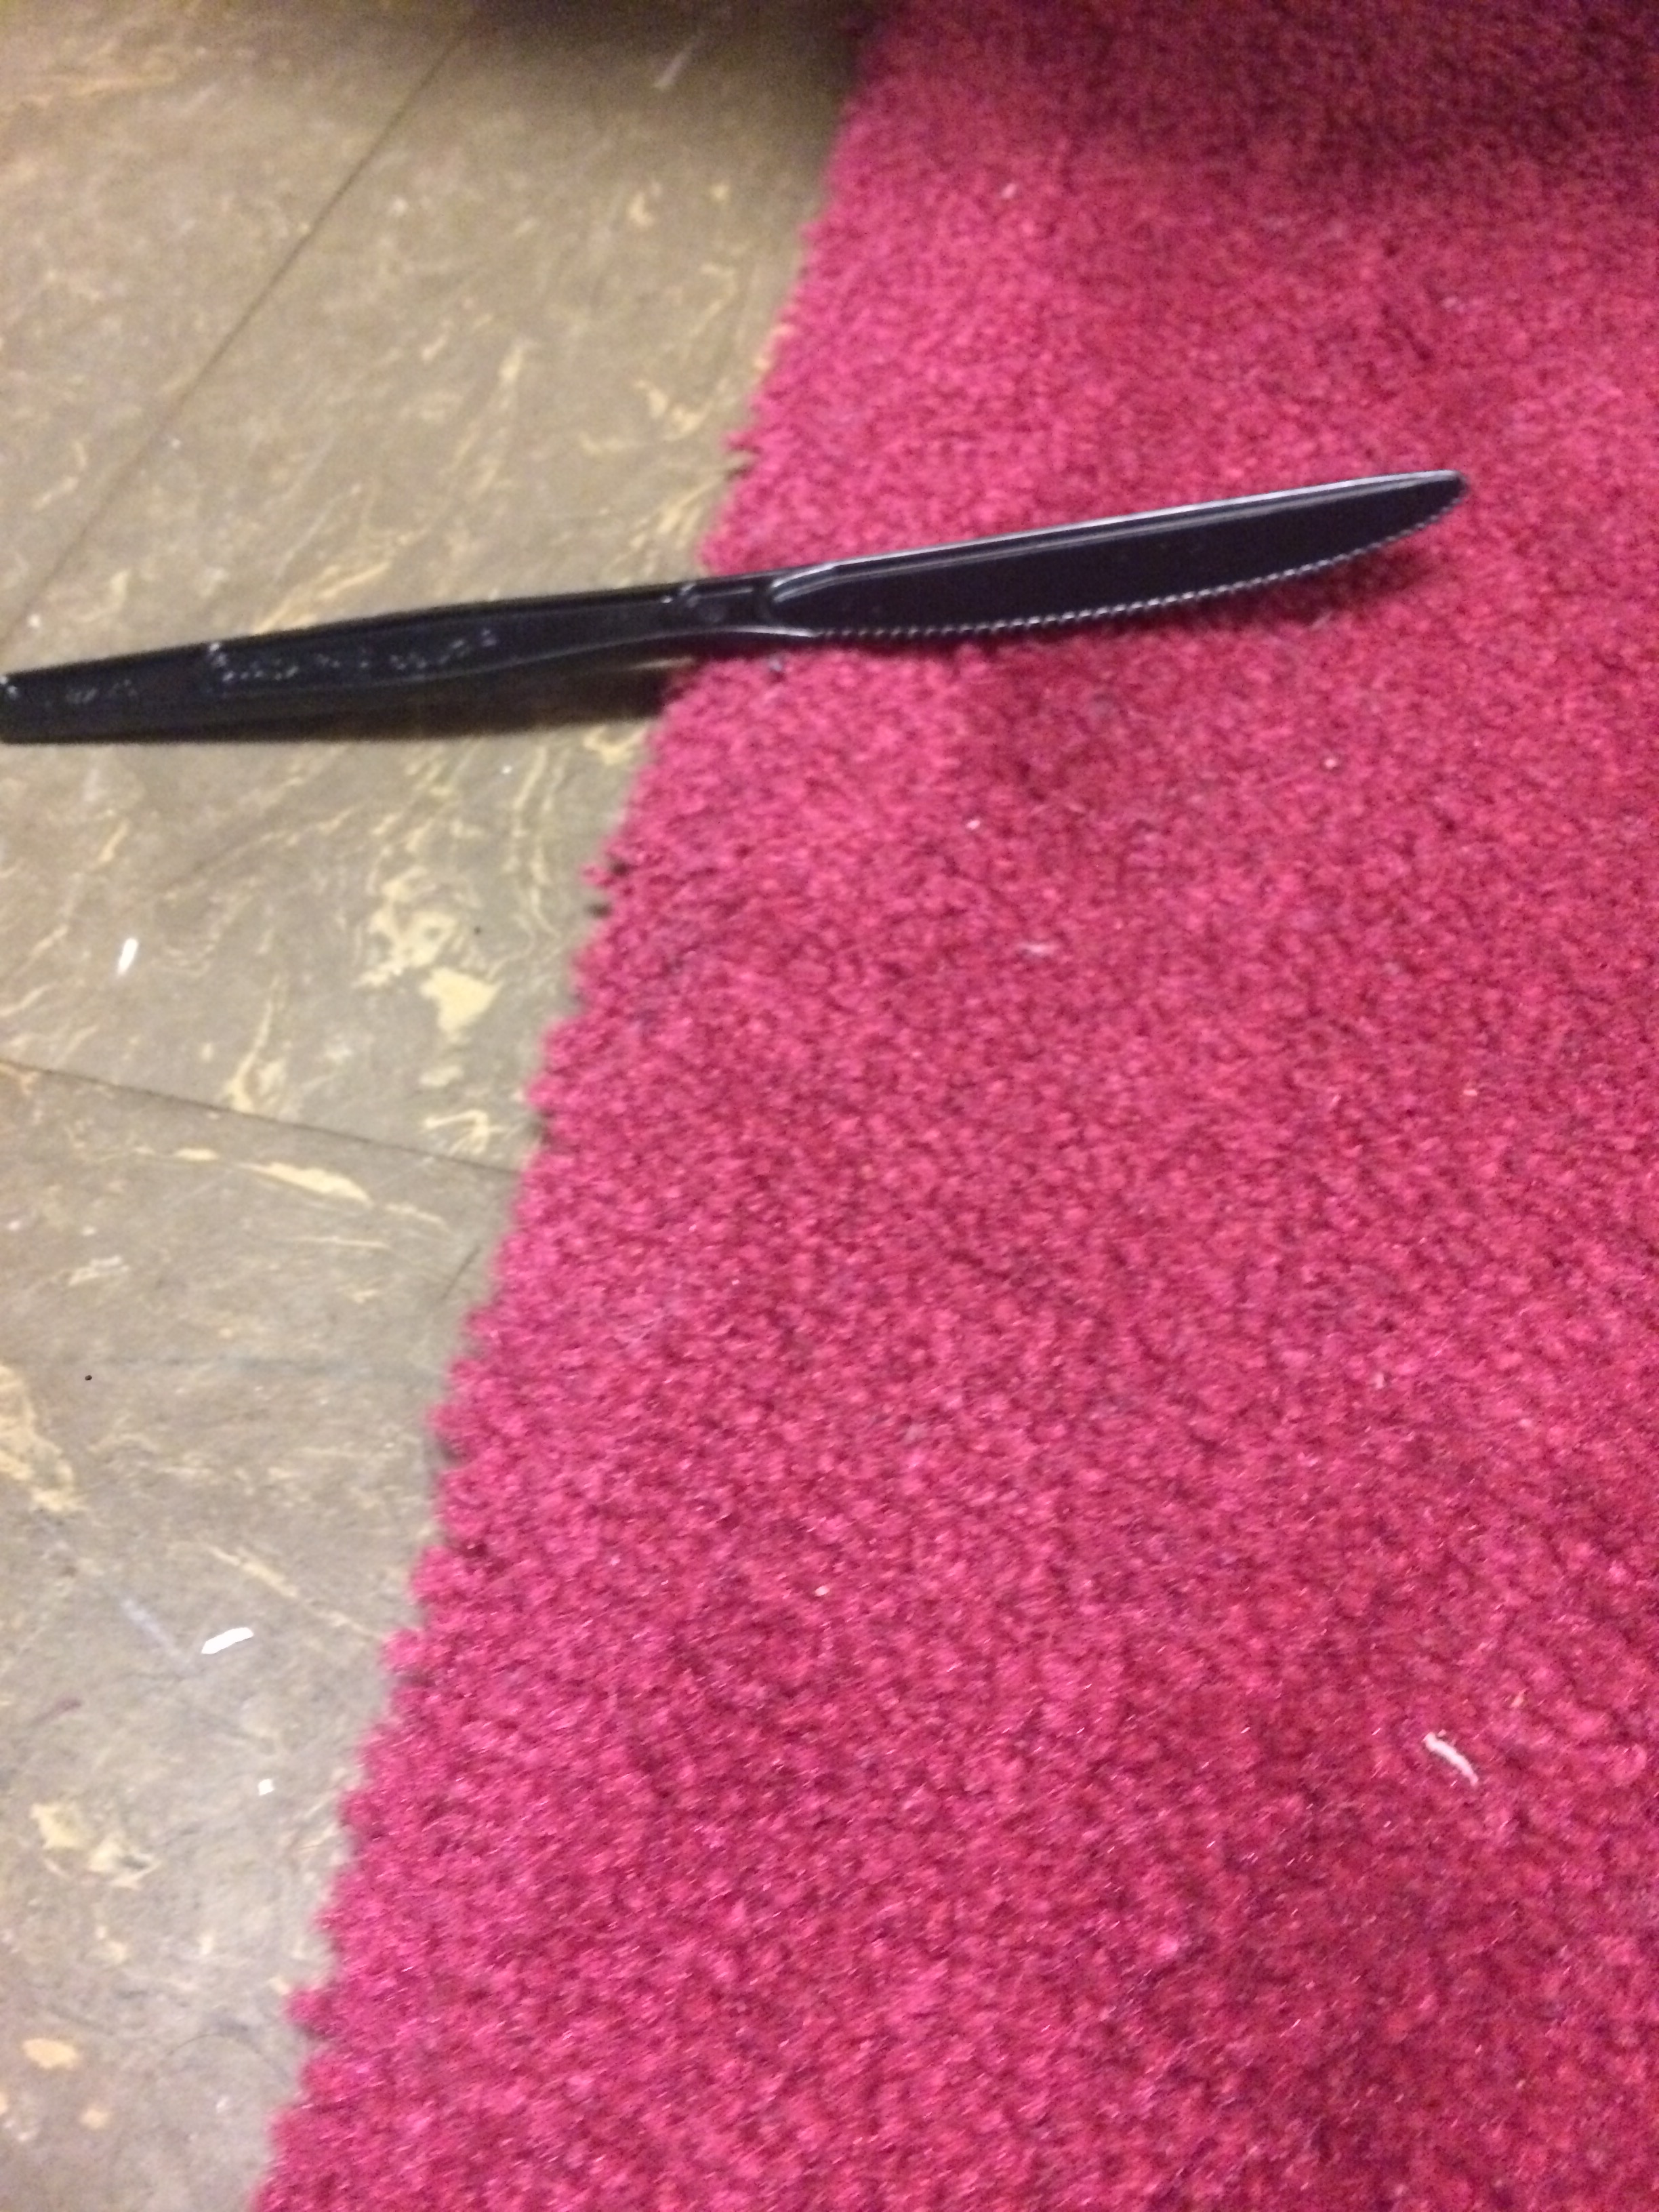 I Lived With A Plastic Knife On My Floor For A Week And This Is What happened